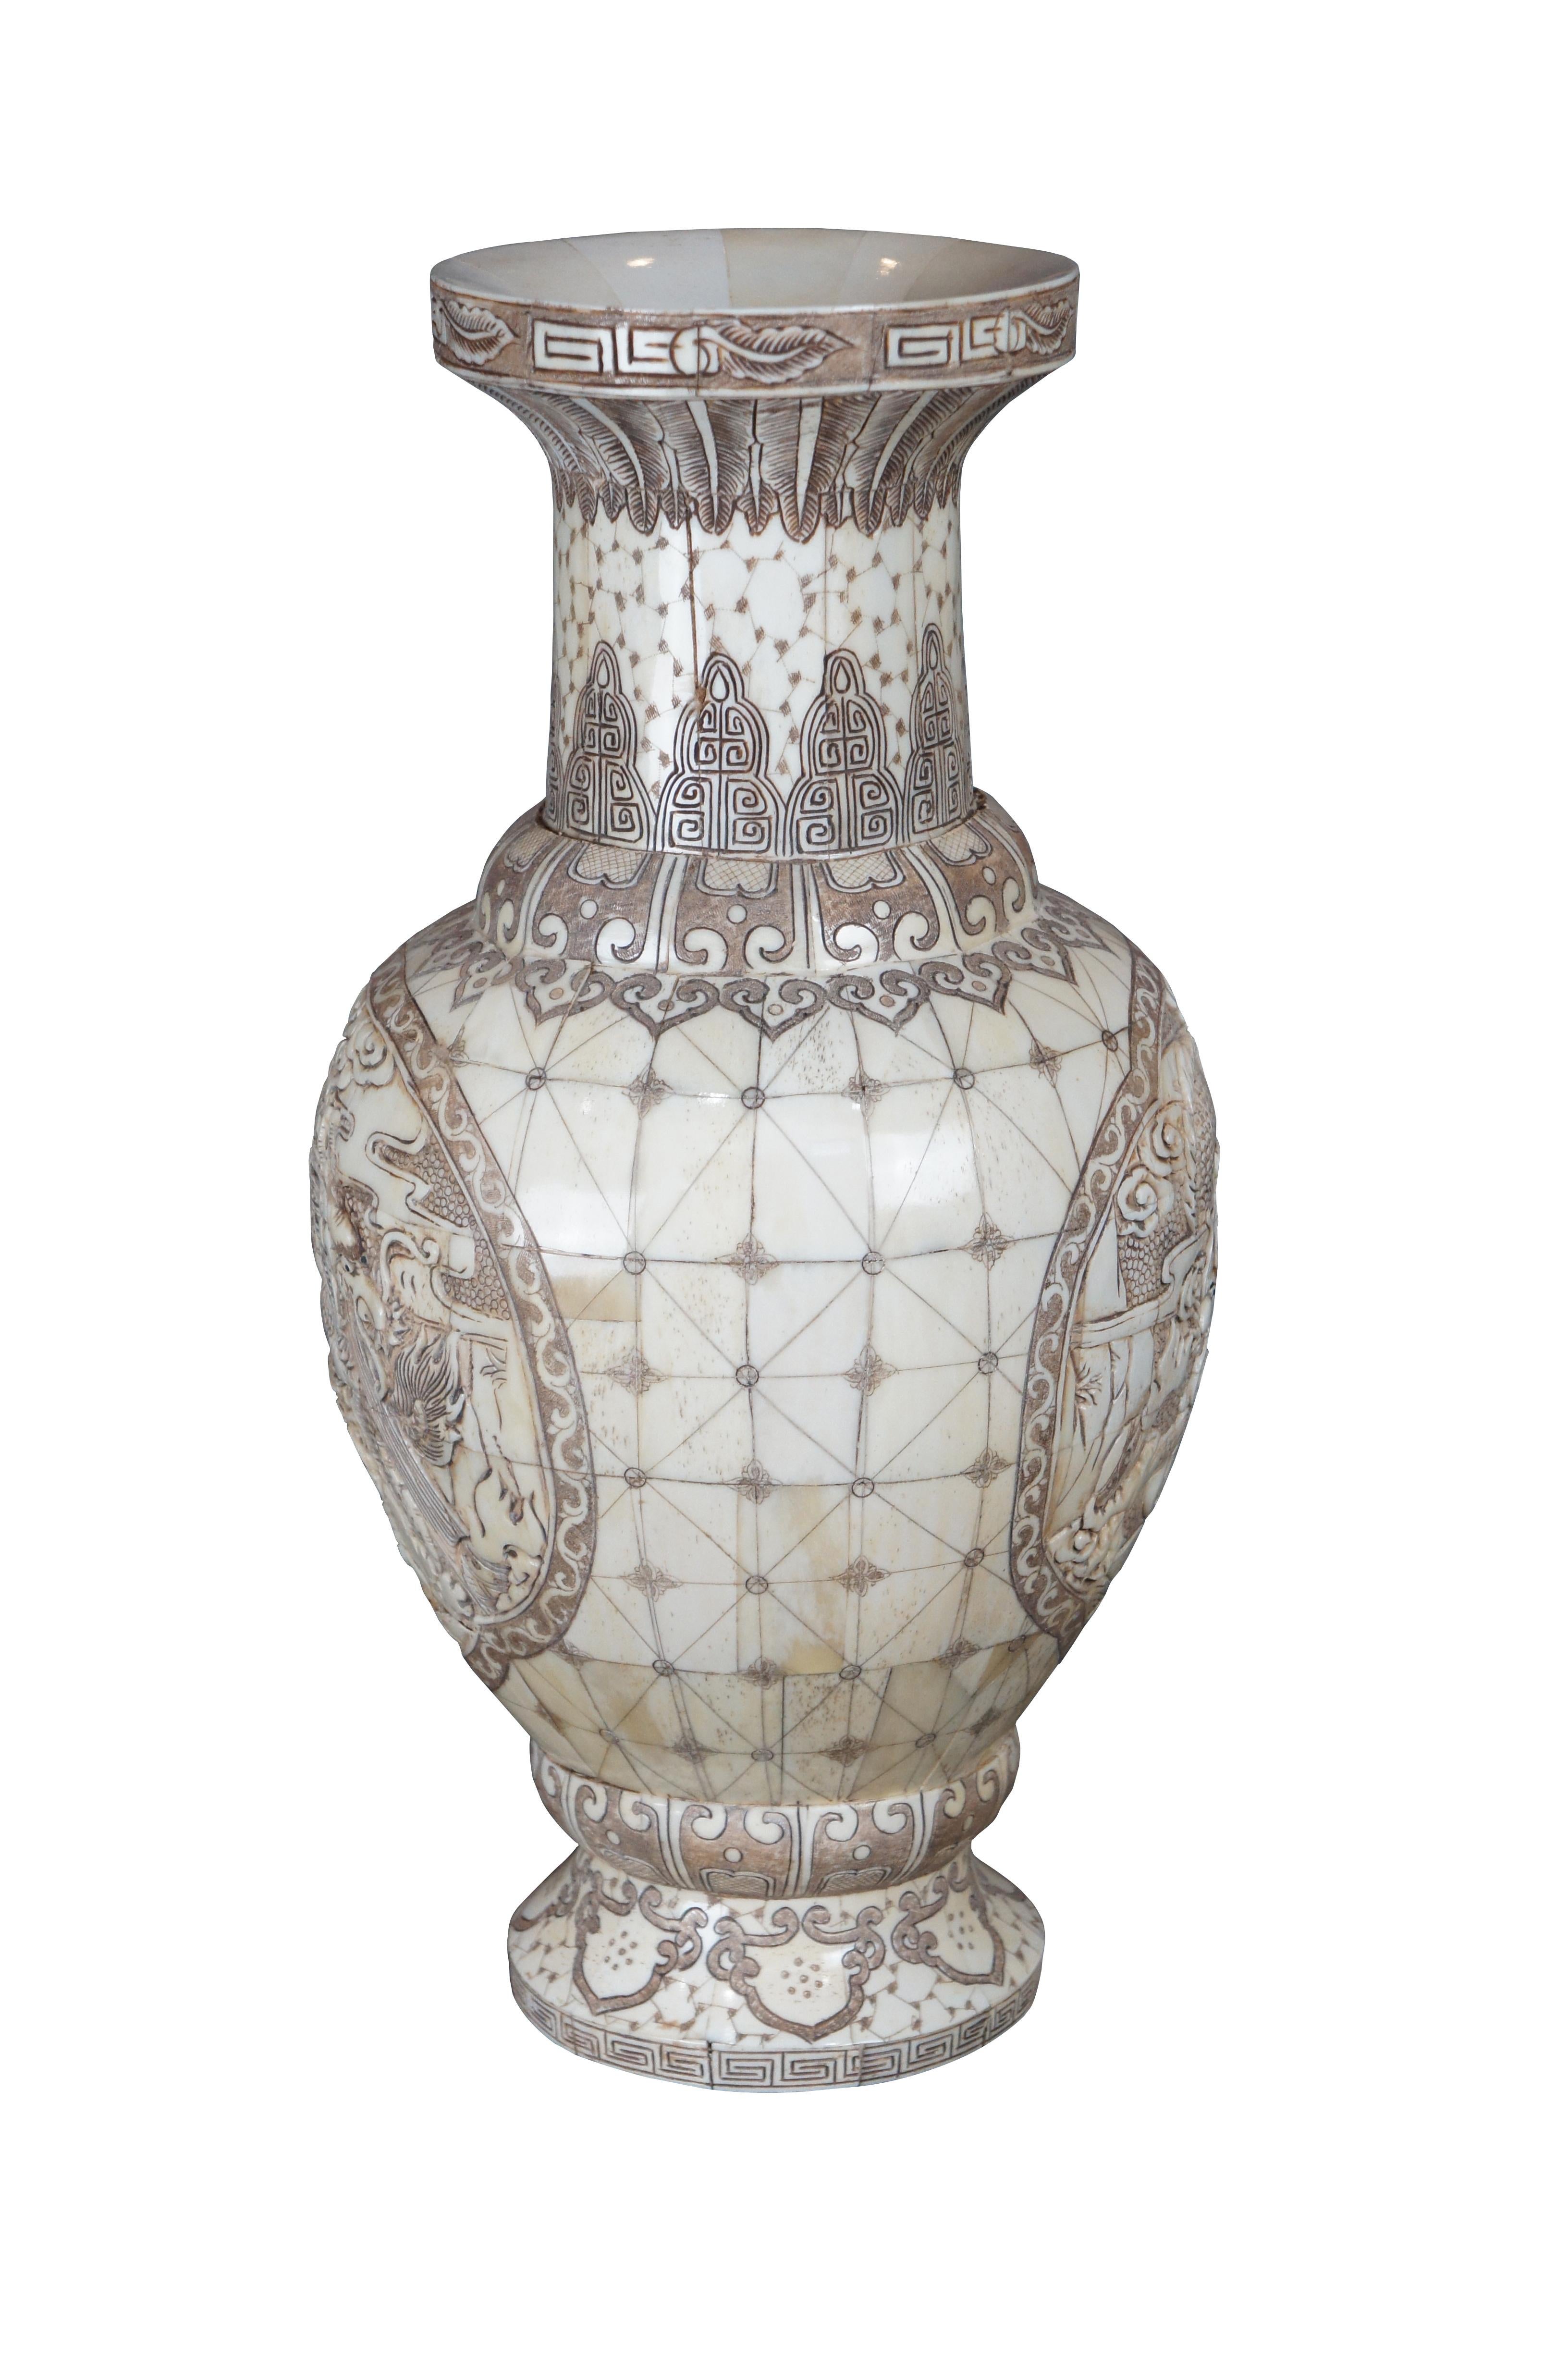 An intriguing Chinese 20th century cow bone veneered vase or bottle. Features a tessellated frame decorated on each side with to gnarling dragons and incised Chinese motifs.

Dimensions:
17.25